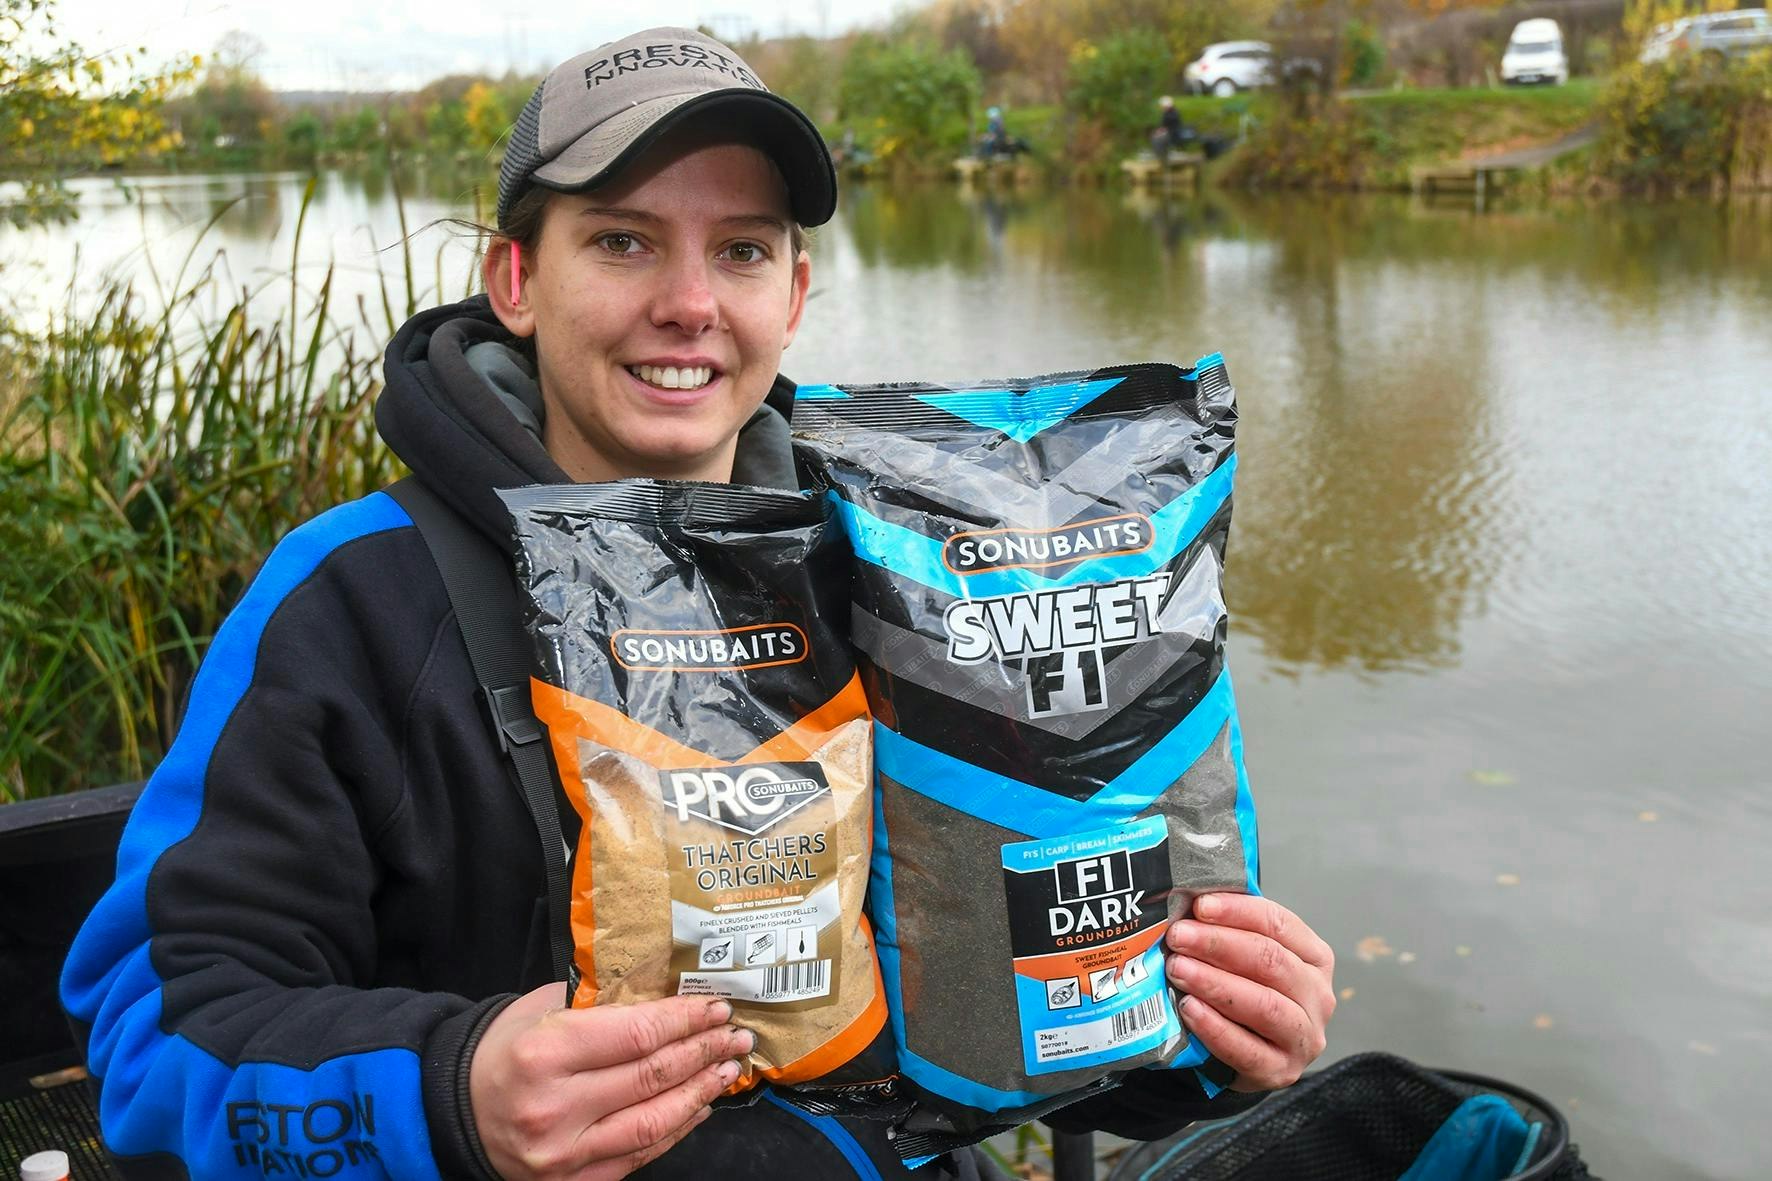 Groundbait is great for "bulking out" worms and getting them to the bottom of the lake.